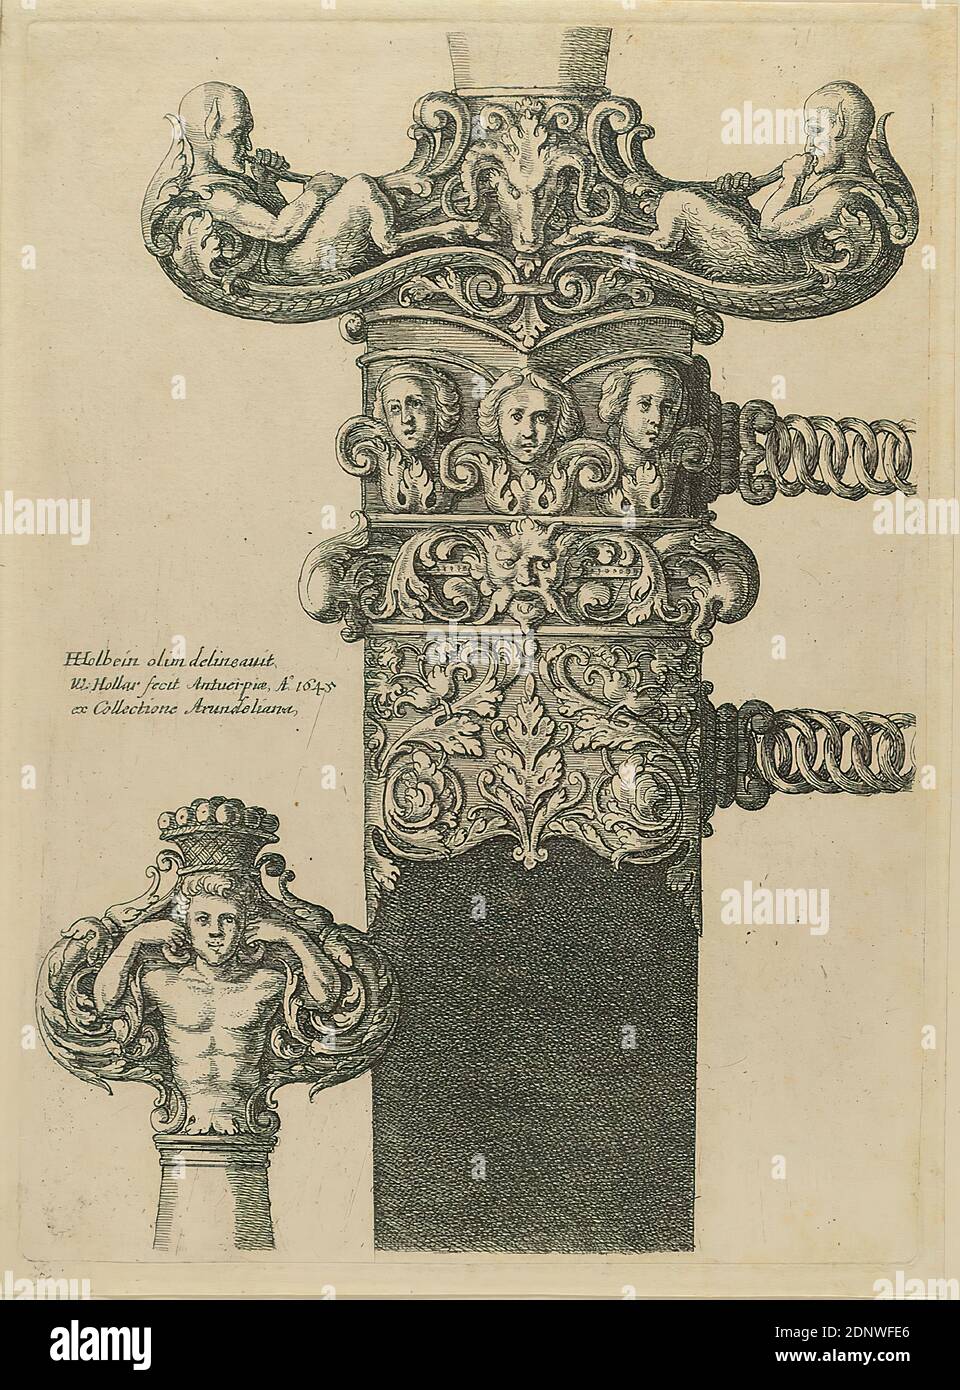 Wenzel Hollar, Hans der Jüngere Holbein, scabbard, paper, etching, sheet size : height: 16,60 cm; width: 12,10 cm, signed, dated and inscribed: in the plate: HHolbein olim delineavit, W. Hollar fecit Antverpiae, A. 1645, ex Collectione Arundeliana, prints, printed matter, scabbard (sword, sword, knife Stock Photo